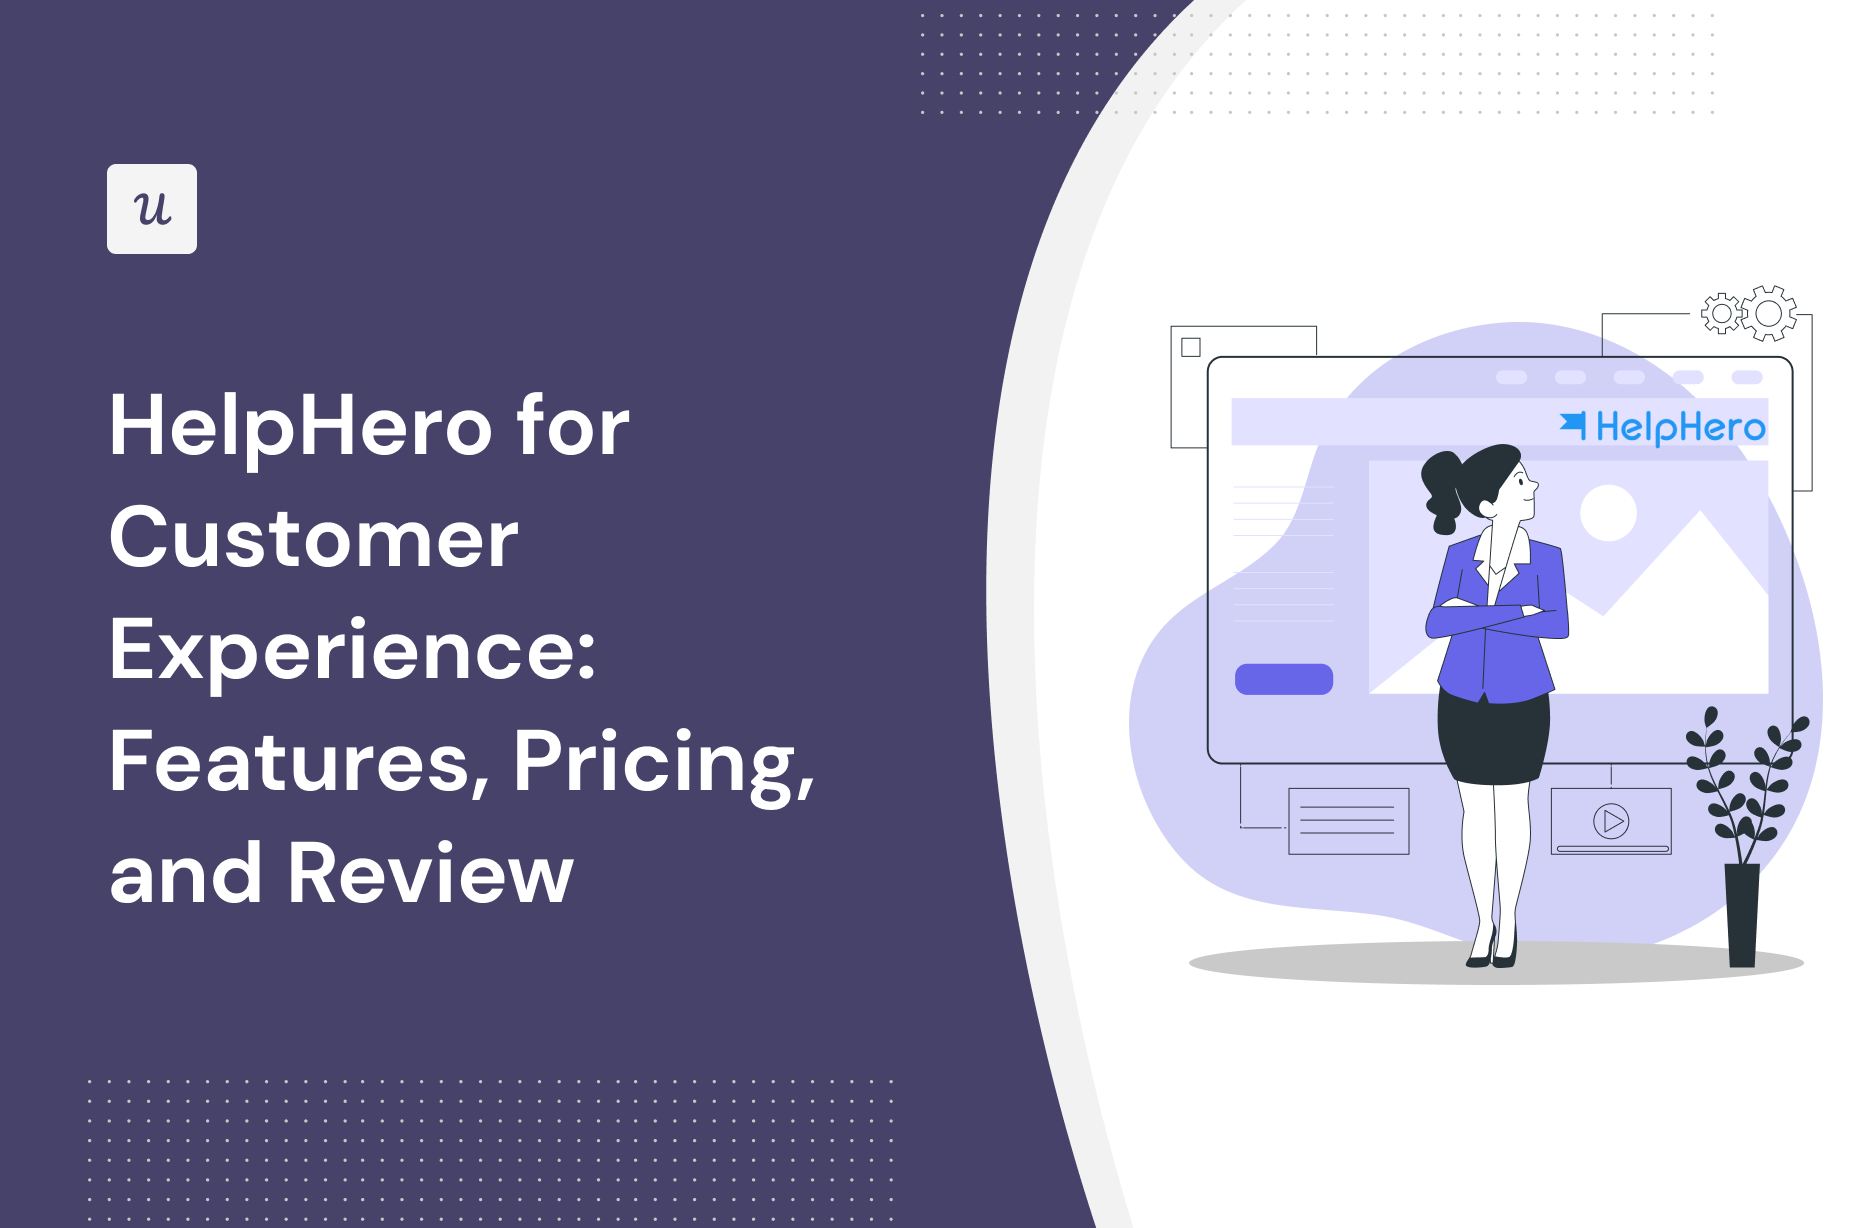 HelpHero for Customer Experience: Features, Pricing, and Review